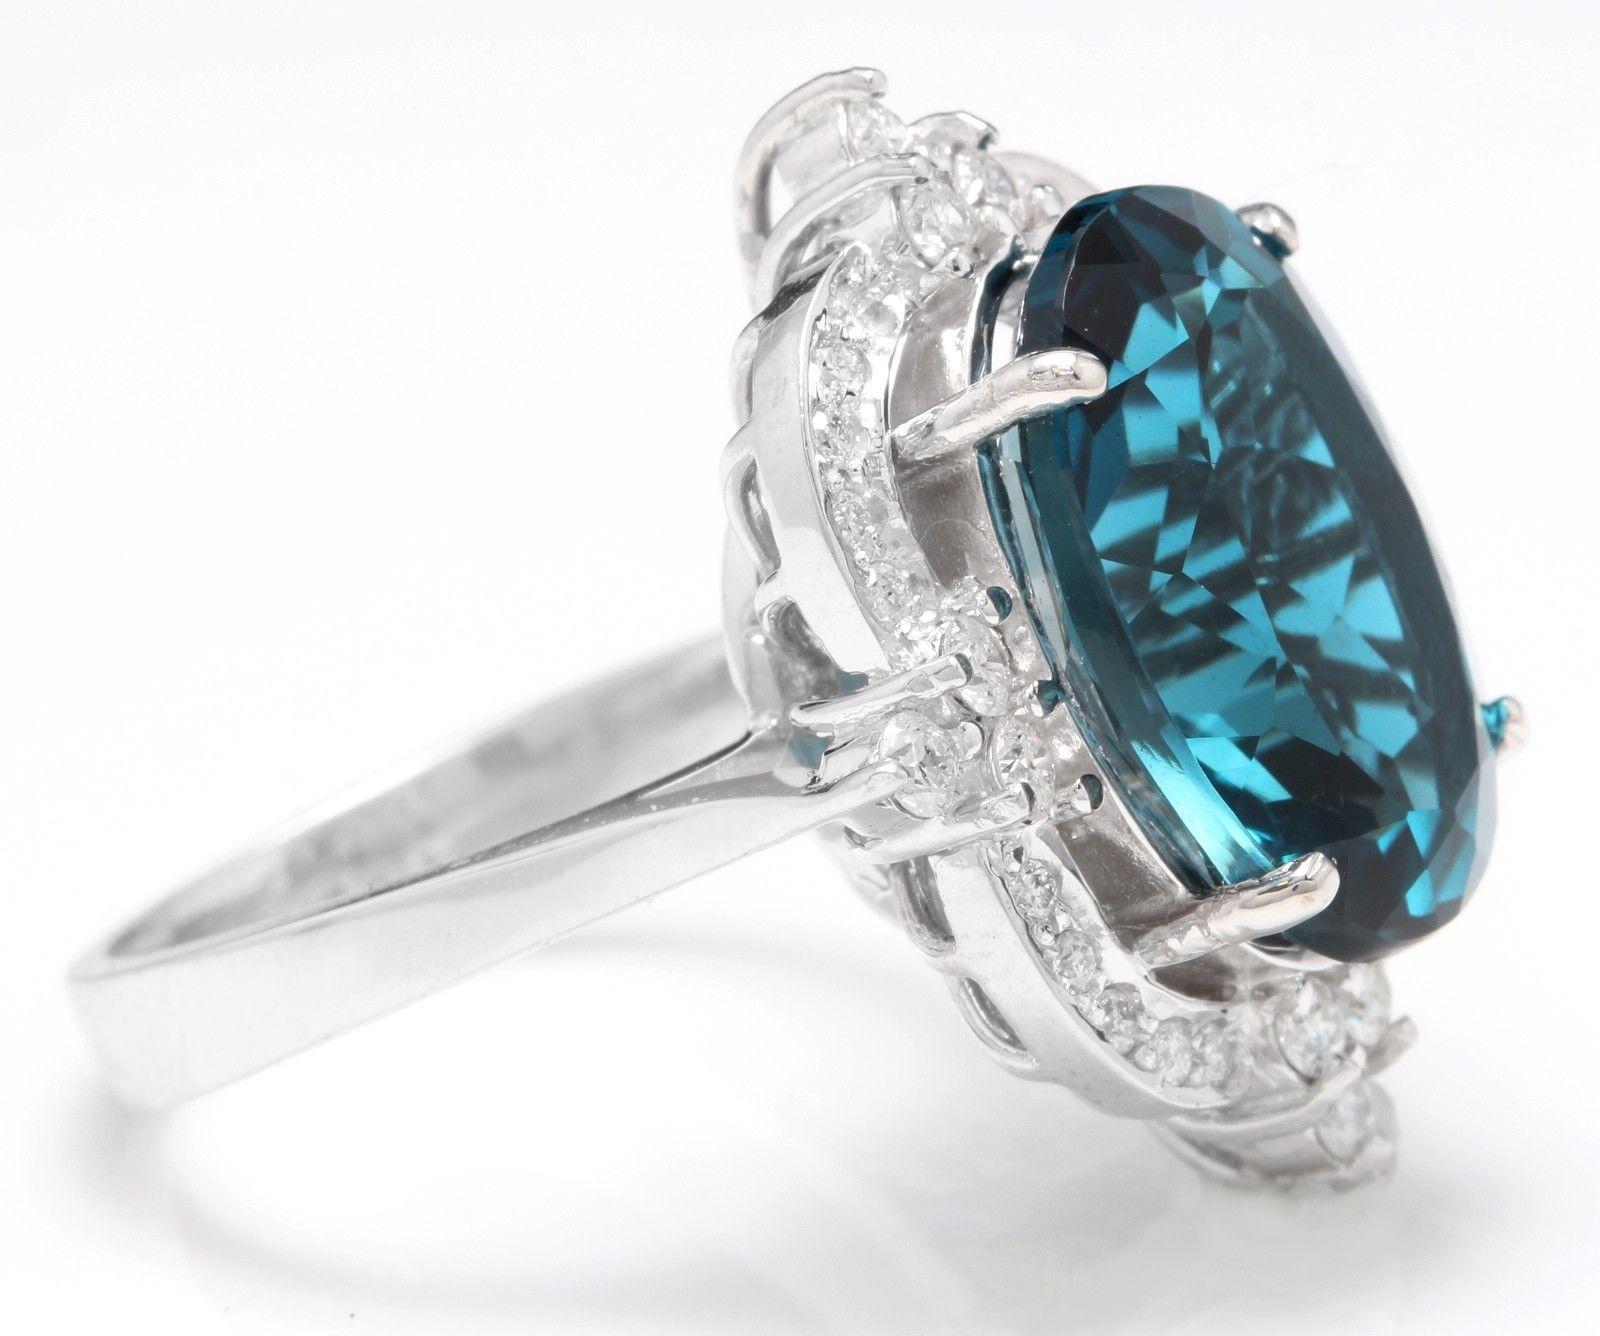 Mixed Cut 12.75 Carat Natural Impressive London Blue Topaz and Diamond 14K White Gold Ring For Sale